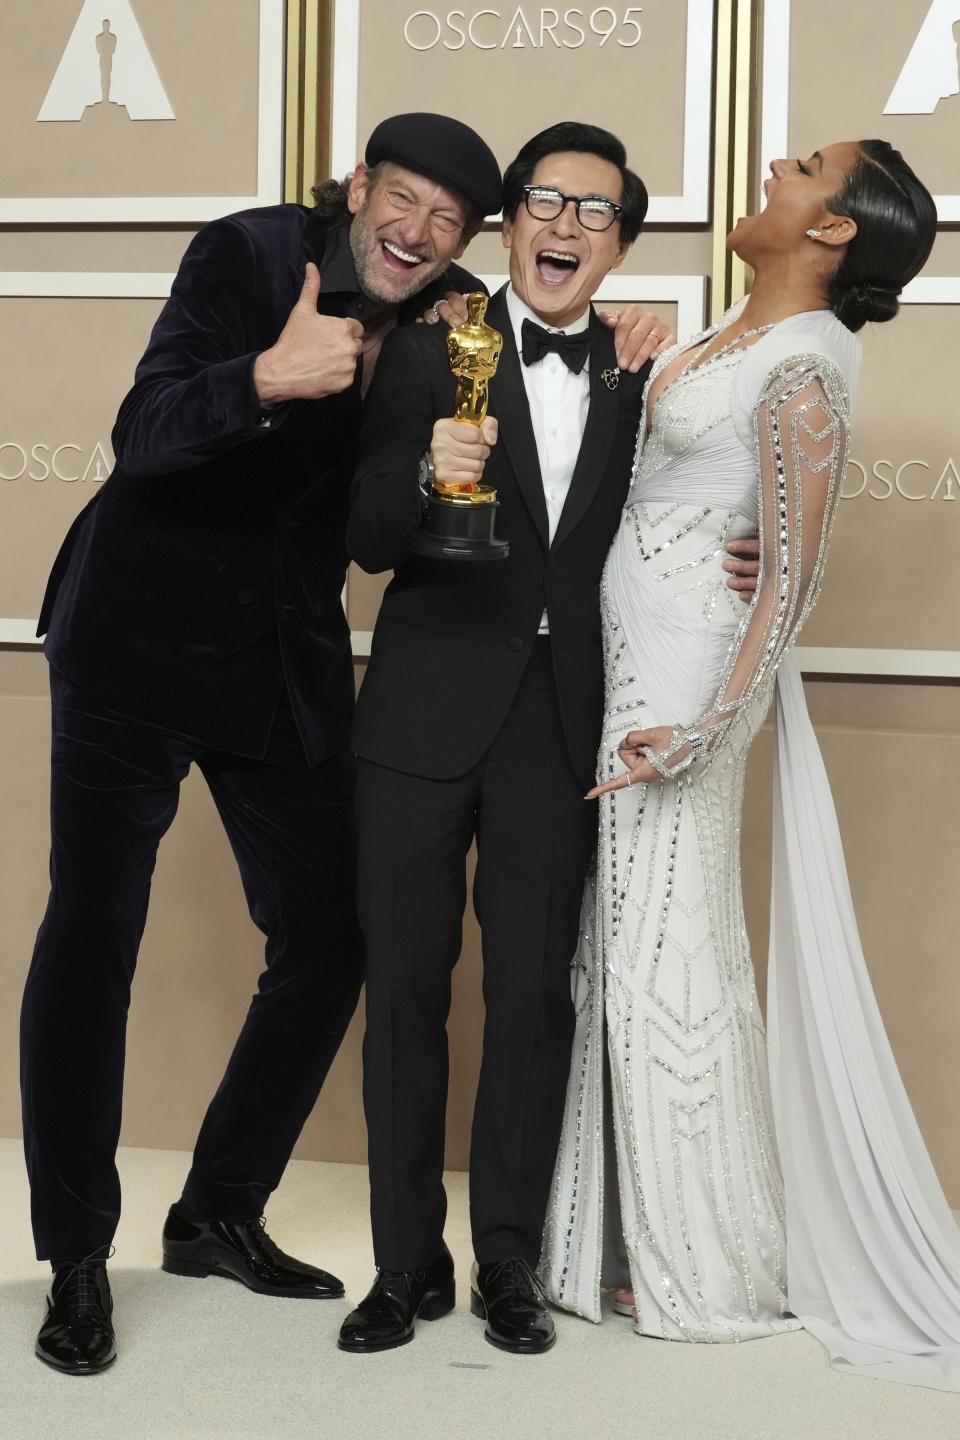 Ke Huy Quan, center, winner of the award for best performance by an actor in a supporting role for "Everything Everywhere All At Once" poses with Troy Kotsur, left, and Ariana DeBose in the press room at the Oscars on Sunday, March 12, 2023, at the Dolby Theatre in Los Angeles. (Photo by Jordan Strauss/Invision/AP)